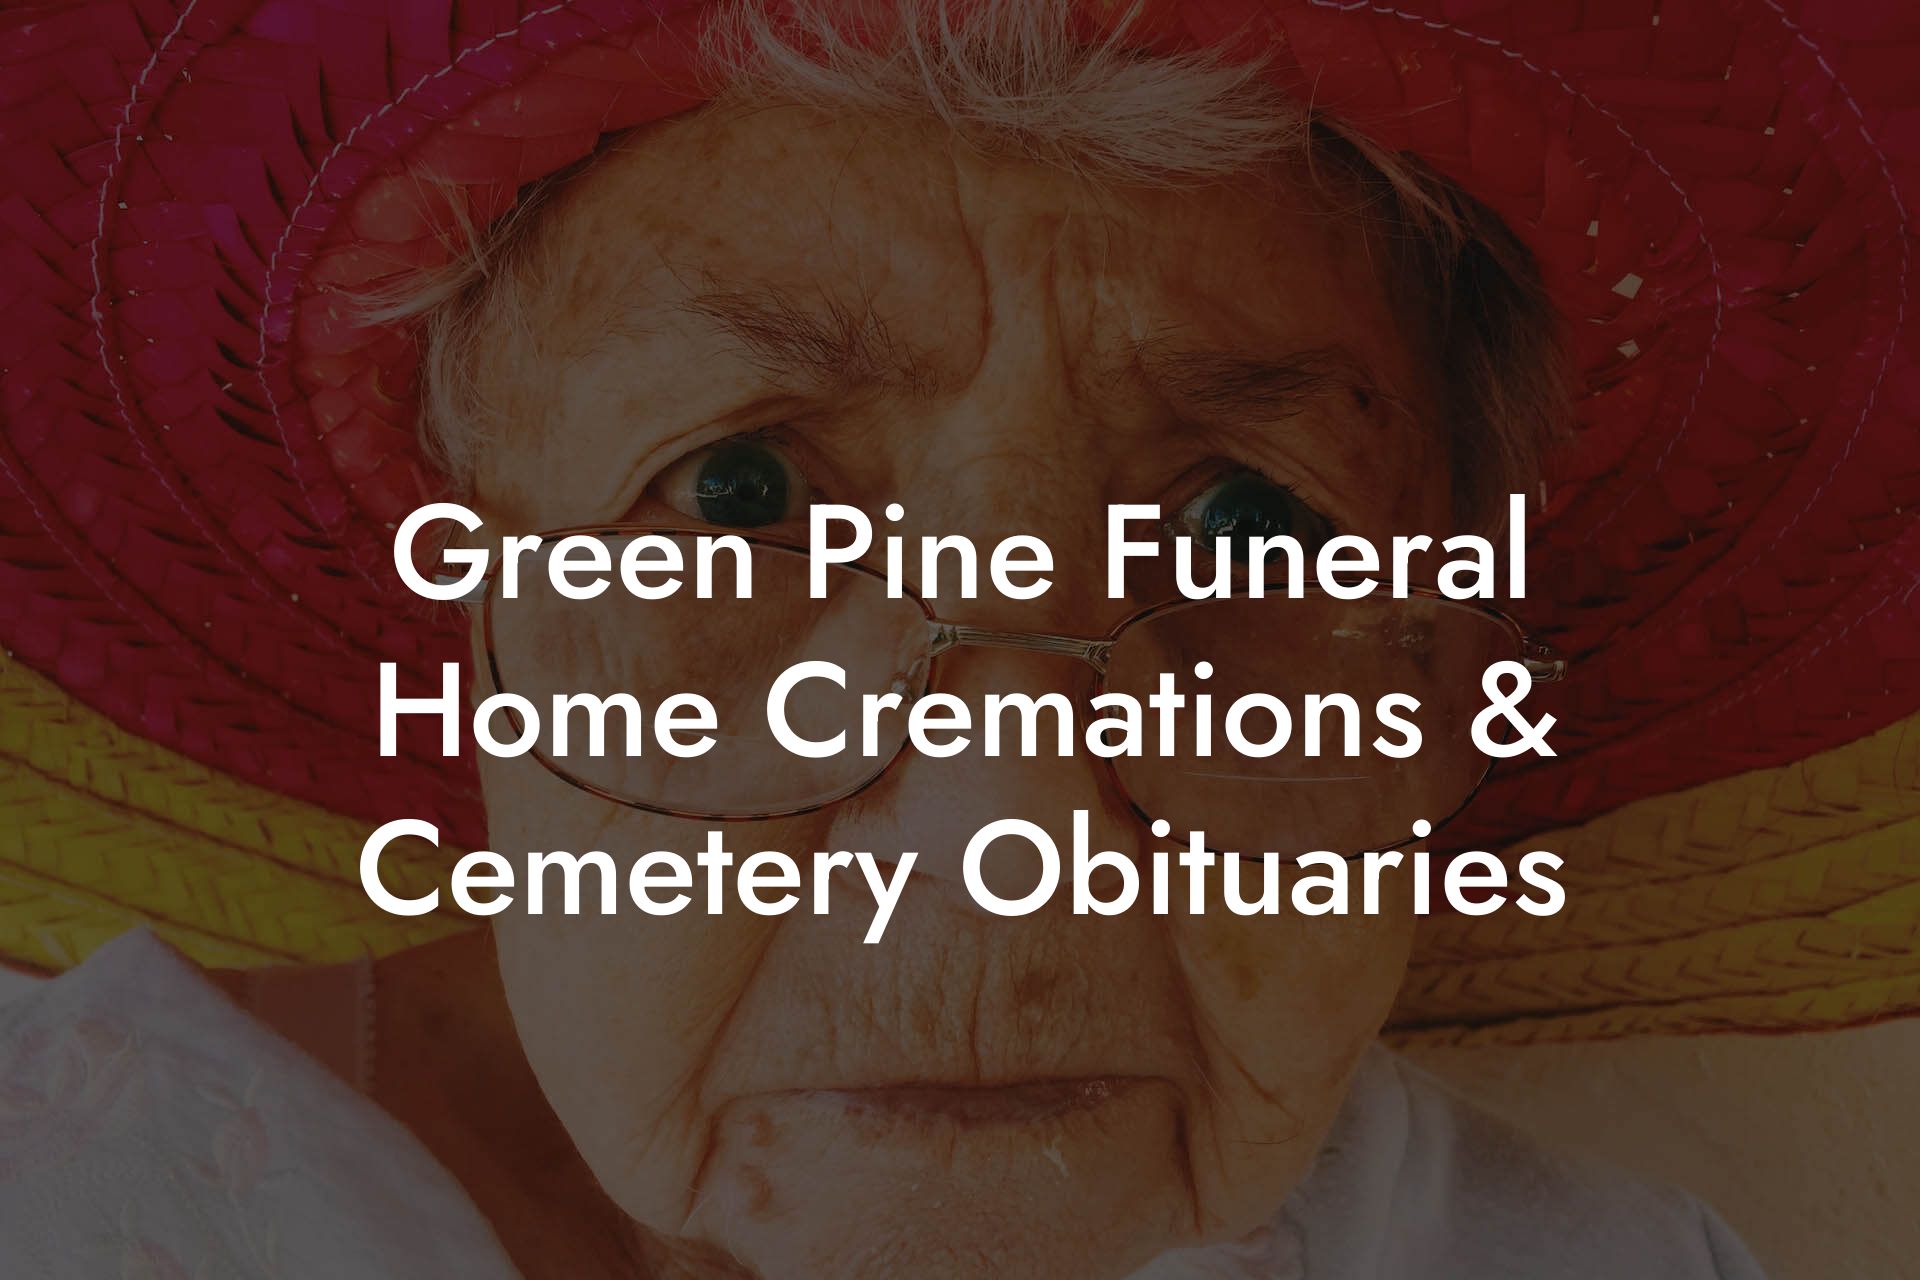 Green Pine Funeral Home Cremations & Cemetery Obituaries